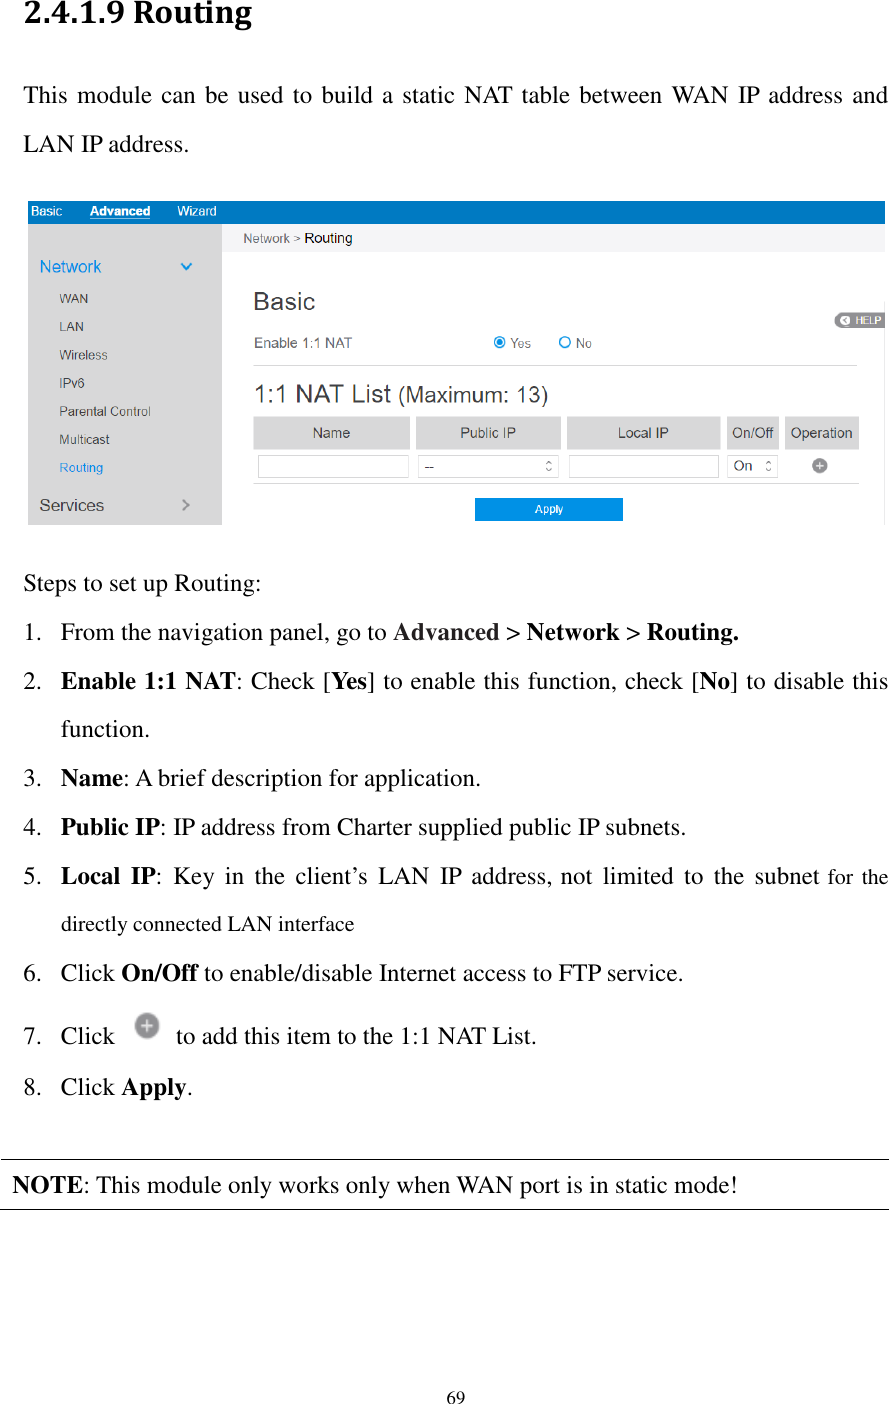  69  2.4.1.9 Routing This module can be used to build a static NAT table between WAN IP address and LAN IP address.    Steps to set up Routing: 1. From the navigation panel, go to Advanced &gt; Network &gt; Routing. 2. Enable 1:1 NAT: Check [Yes] to enable this function, check [No] to disable this function. 3. Name: A brief description for application. 4. Public IP: IP address from Charter supplied public IP subnets. 5. Local  IP:  Key in  the  client’s  LAN  IP  address, not  limited  to  the  subnet for the directly connected LAN interface 6. Click On/Off to enable/disable Internet access to FTP service. 7. Click    to add this item to the 1:1 NAT List. 8. Click Apply.  NOTE: This module only works only when WAN port is in static mode!   